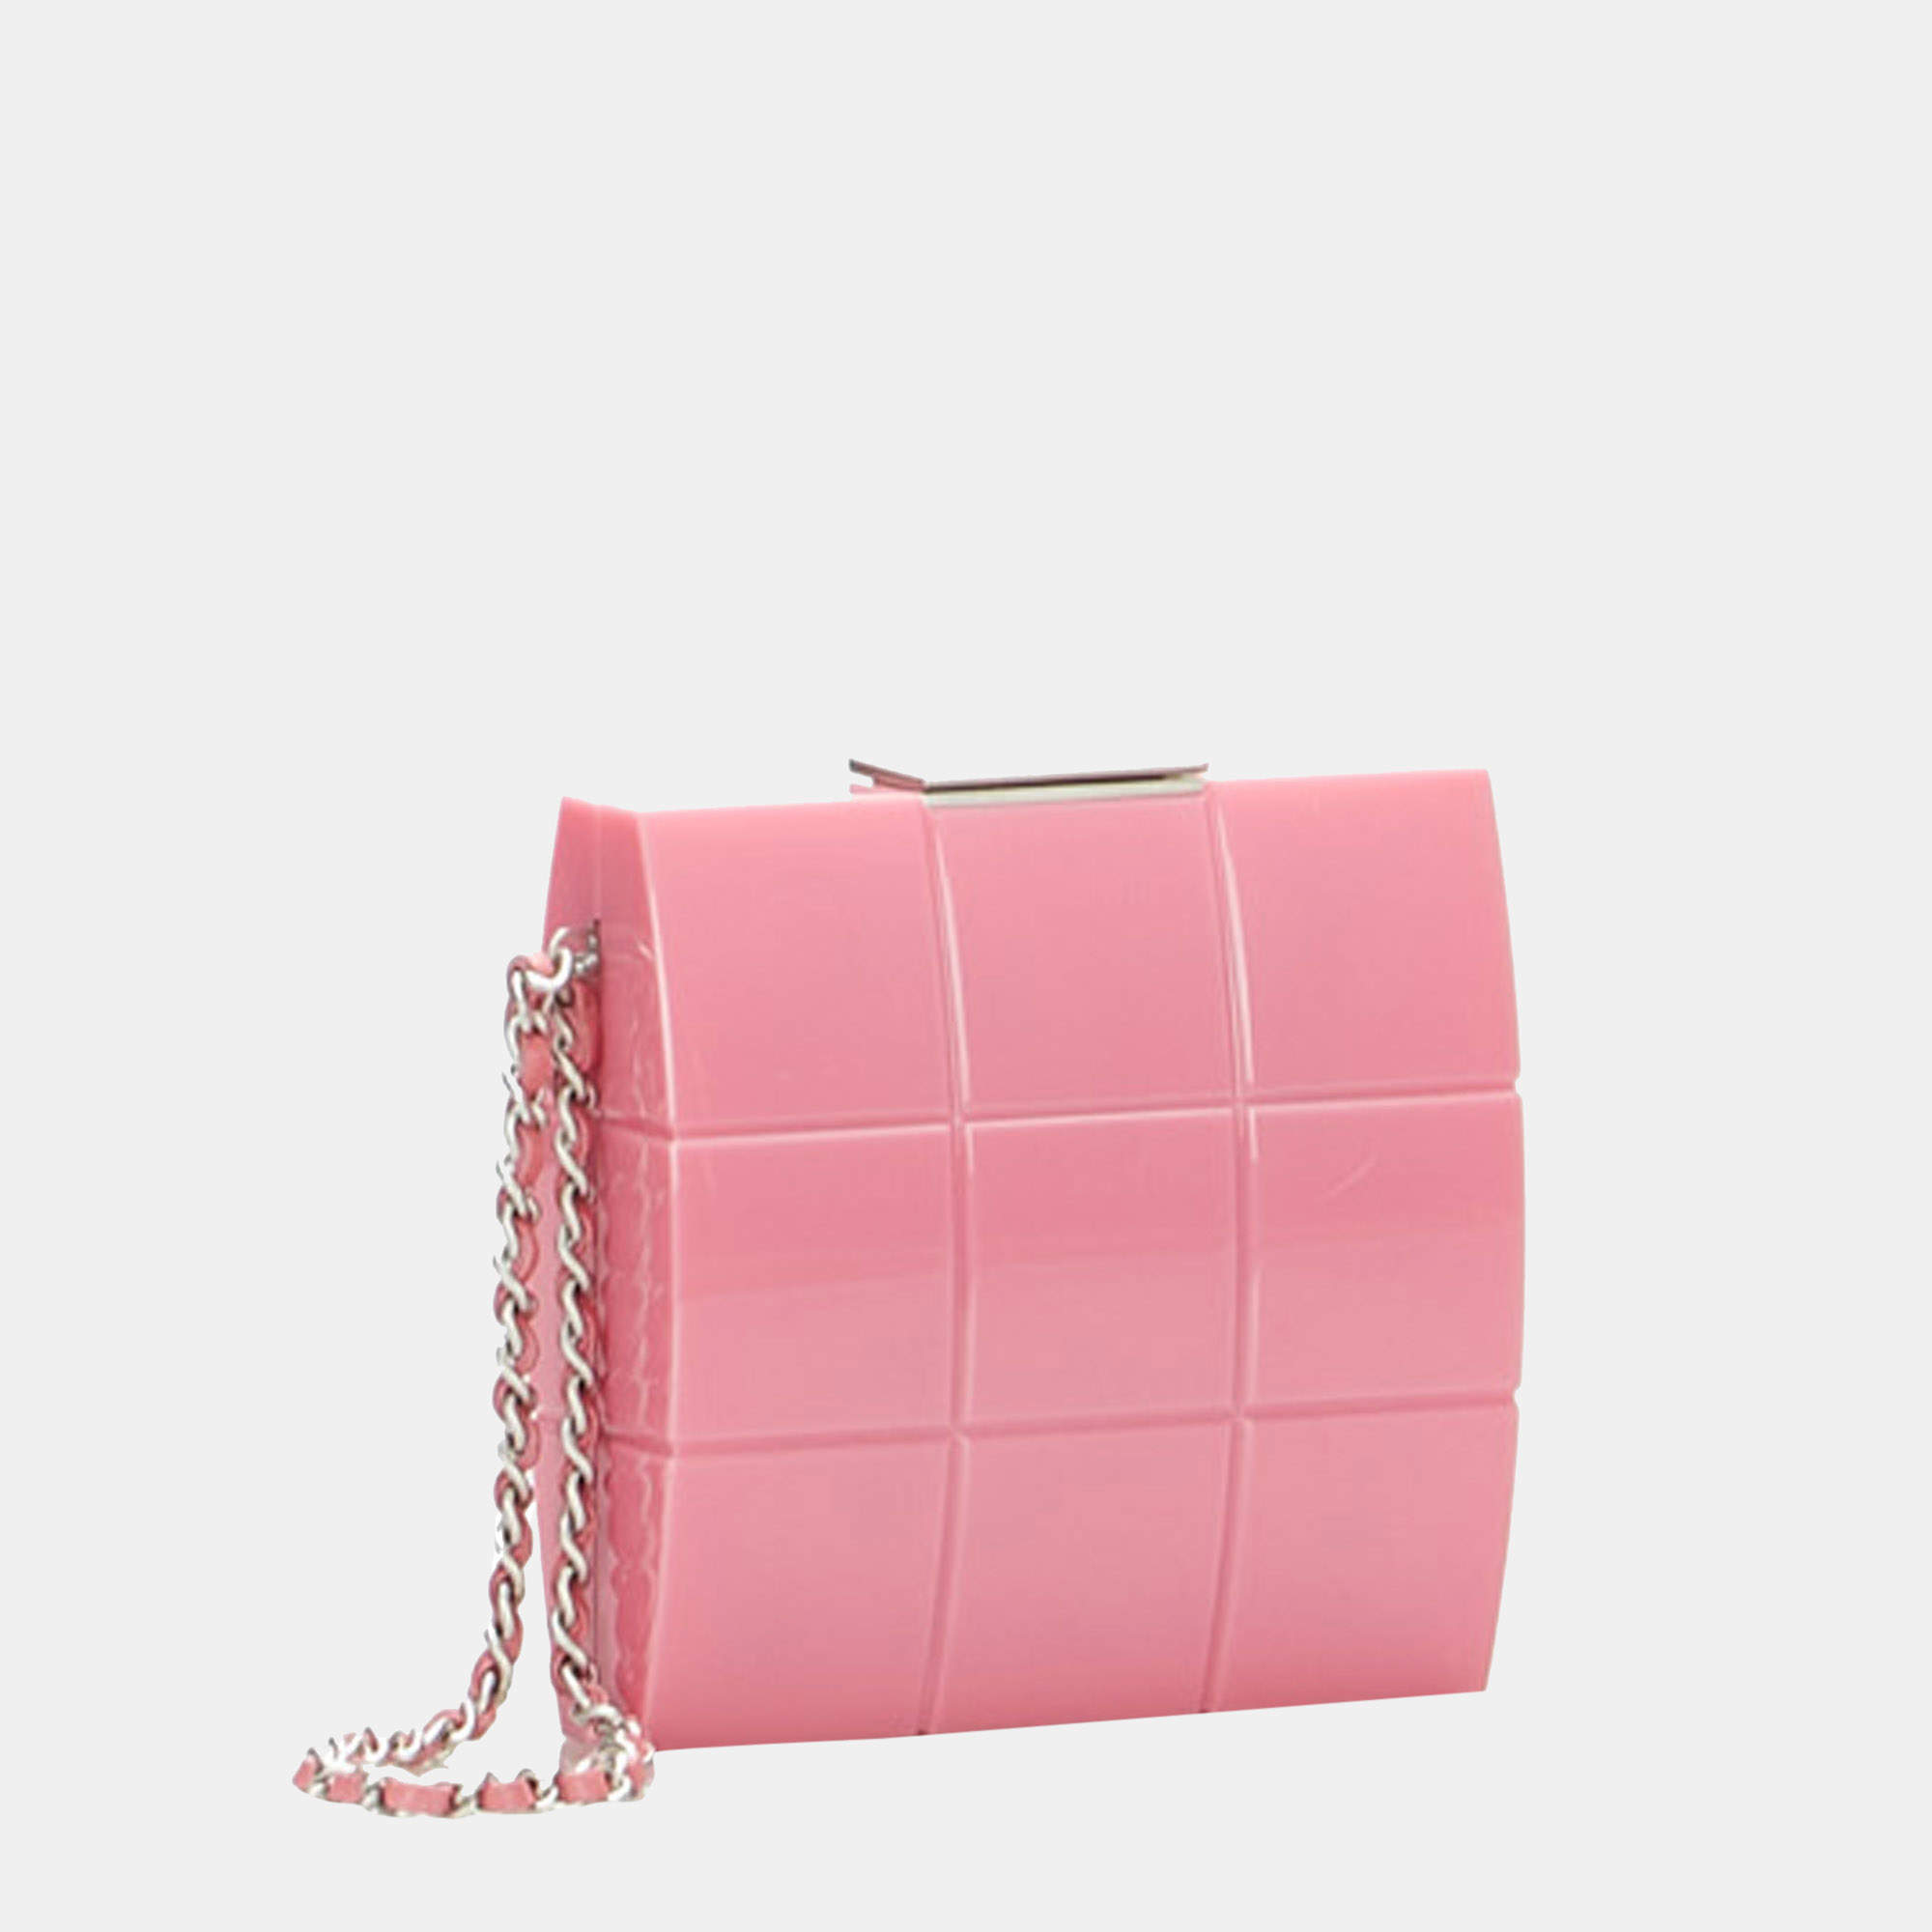 Pink Lucite Box Clutch Silver Hardware, 2002, Handbags & Accessories, The  Chanel Collection, 2022